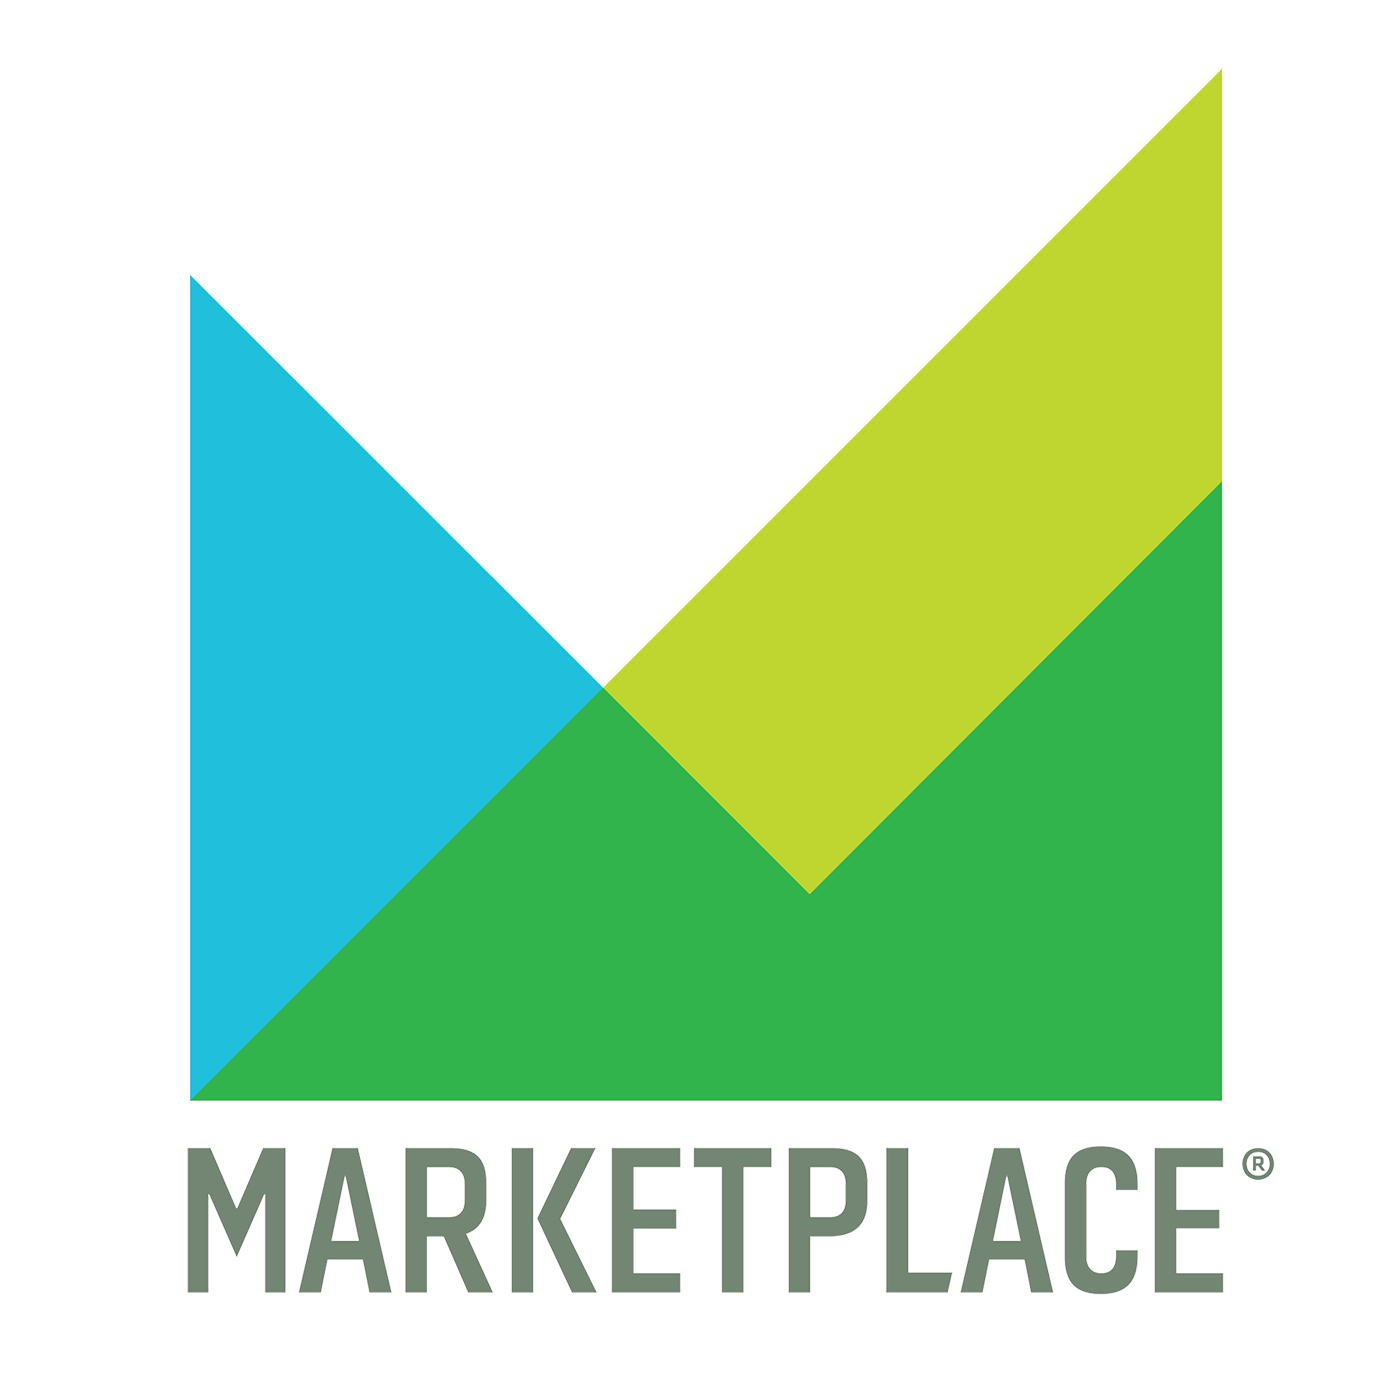 Gretchen Blough Discusses Trade Wars on Marketplace Podcast